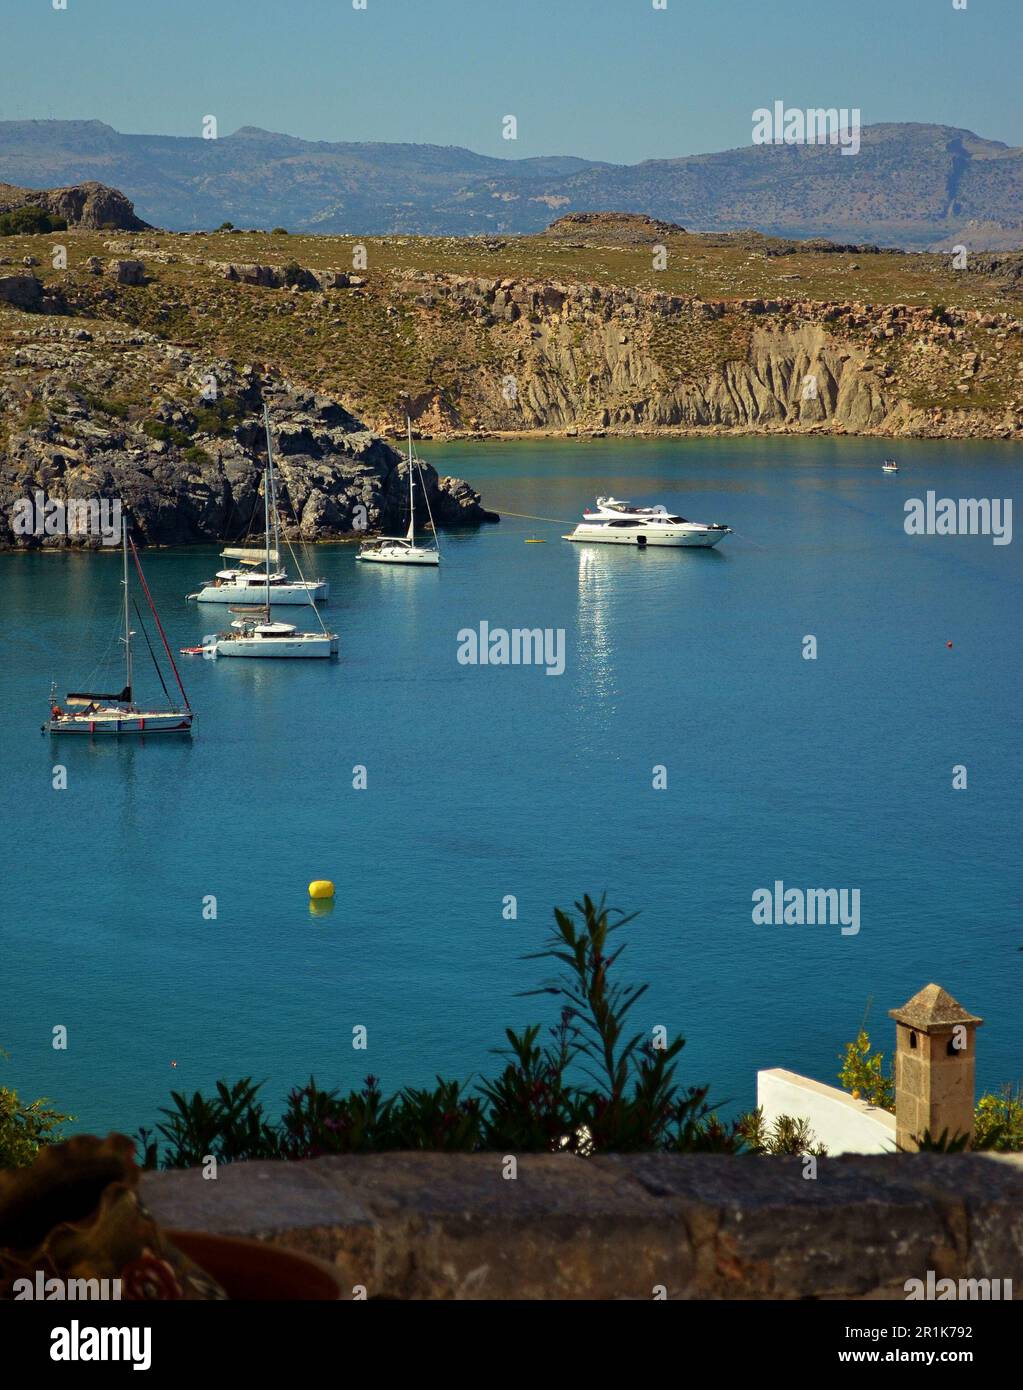 Snow-white motor yachts are moored in the bay,near the rocks, in the seaport of Lindos on the island of Rhodes.Mountains are visible in the background Stock Photo